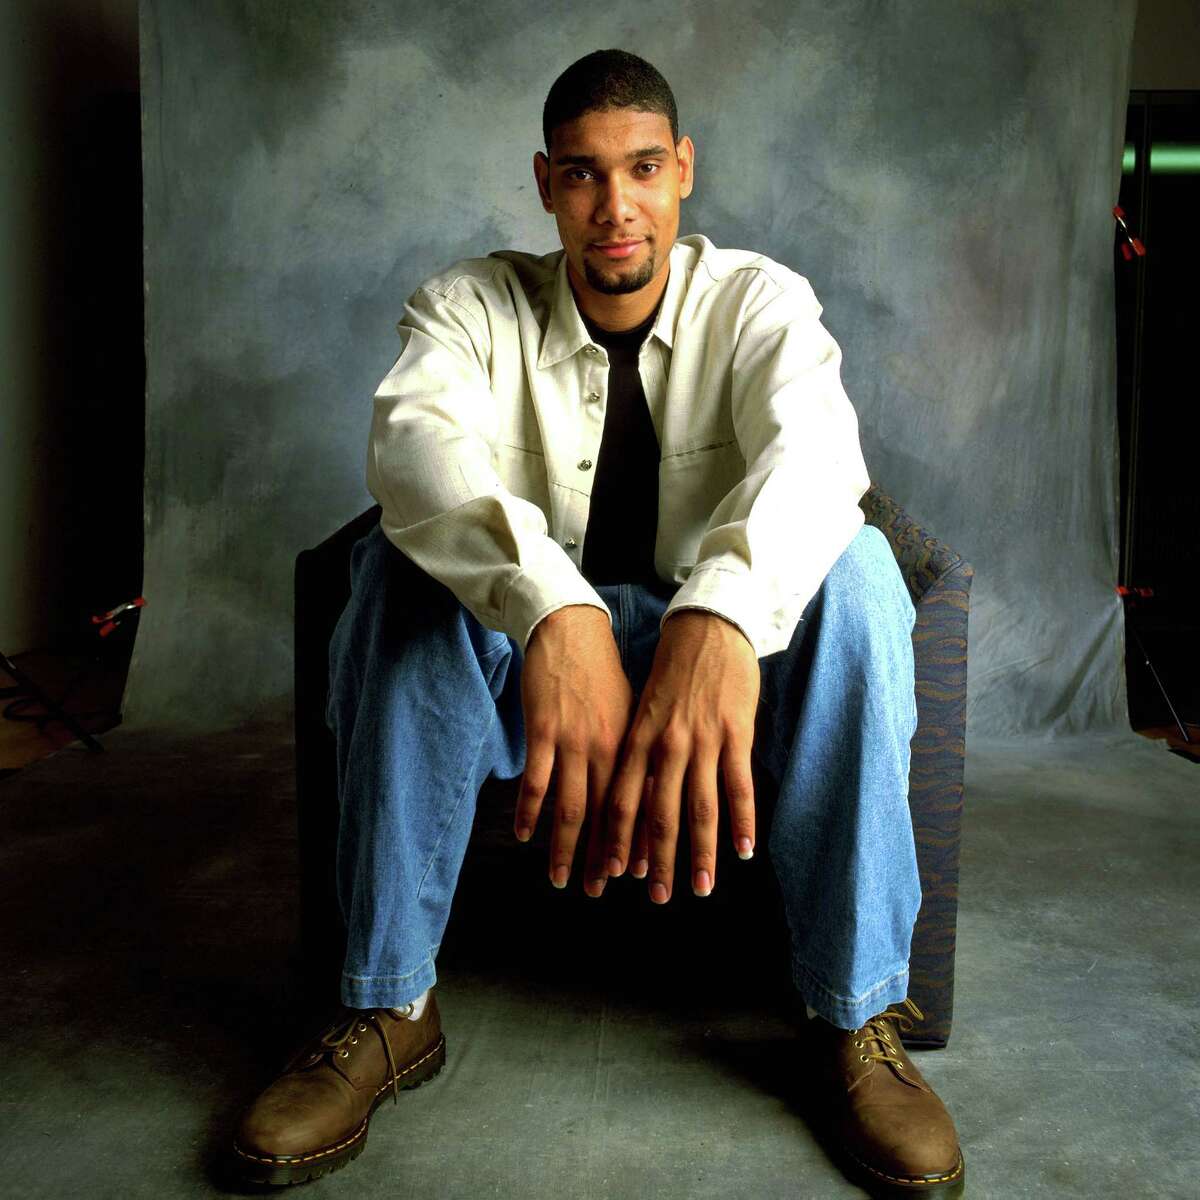 Tim Duncan's down-to-earth style hasn't evolved much in the years since he turned pro in the NBA. Here he is in his rookie year, 1998.